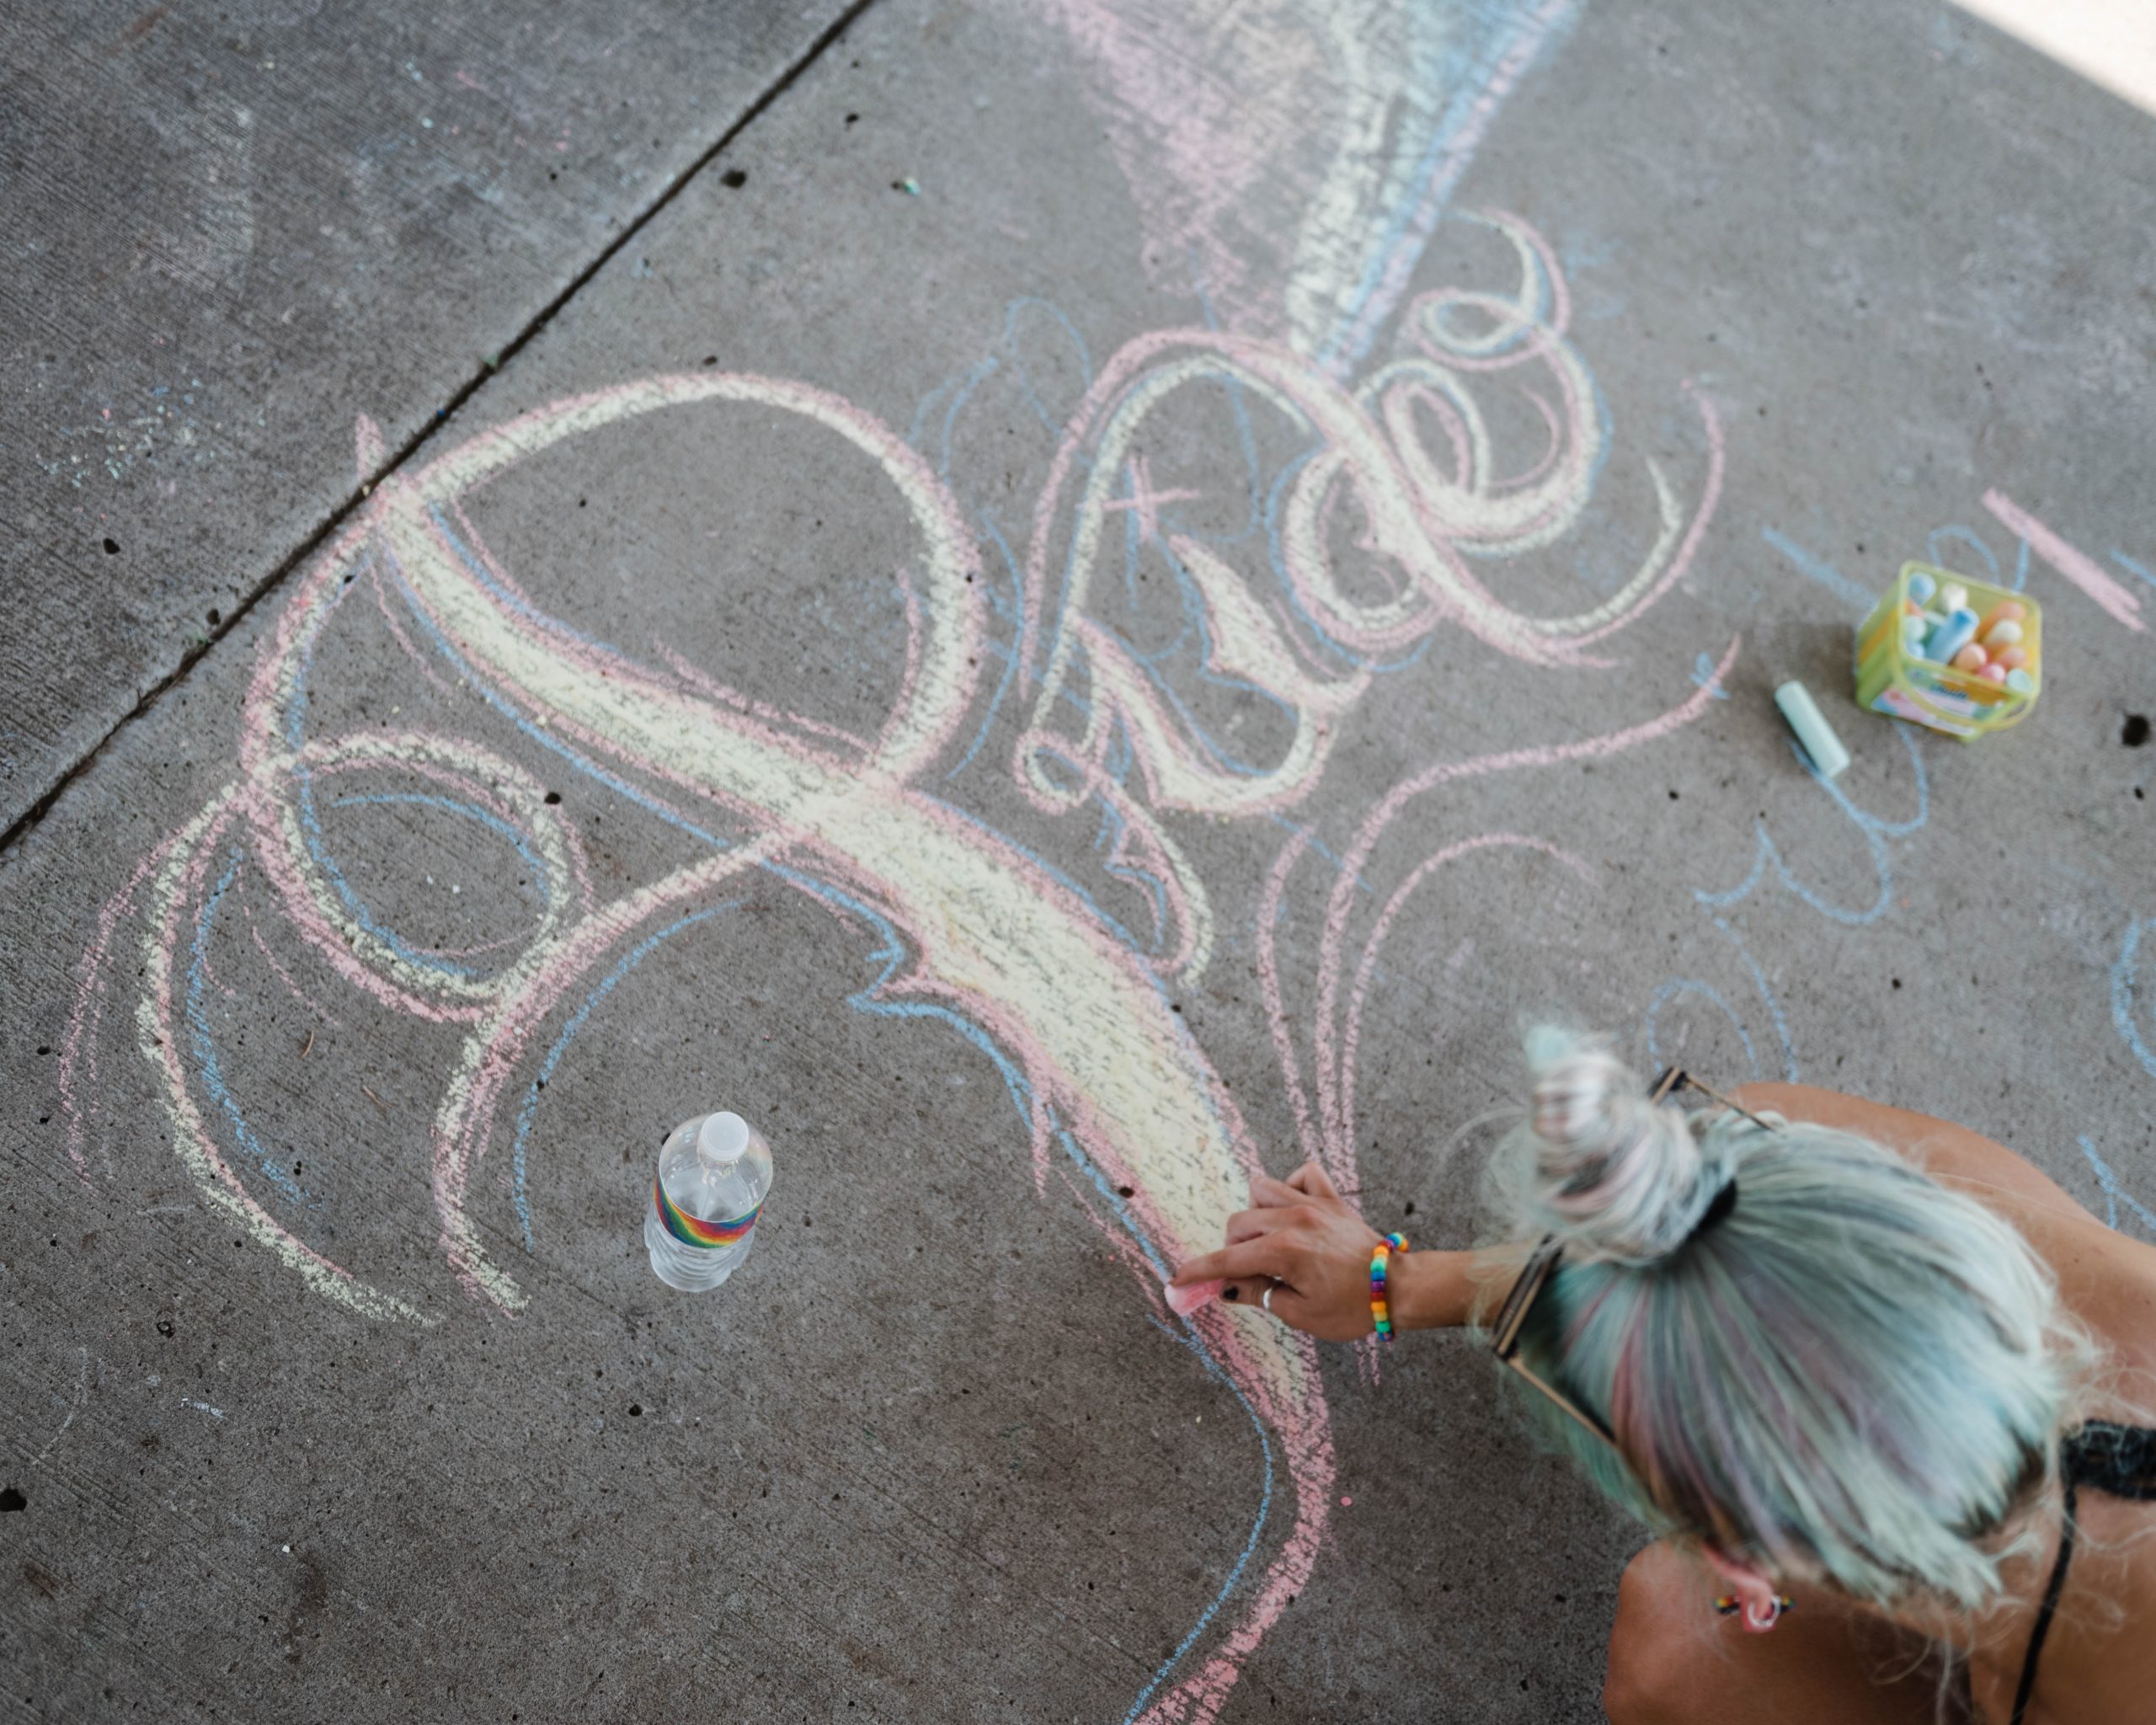 A person with light blue hair (seen from above and behind) draws the word "Pride" in calligraphy on a sidewalk